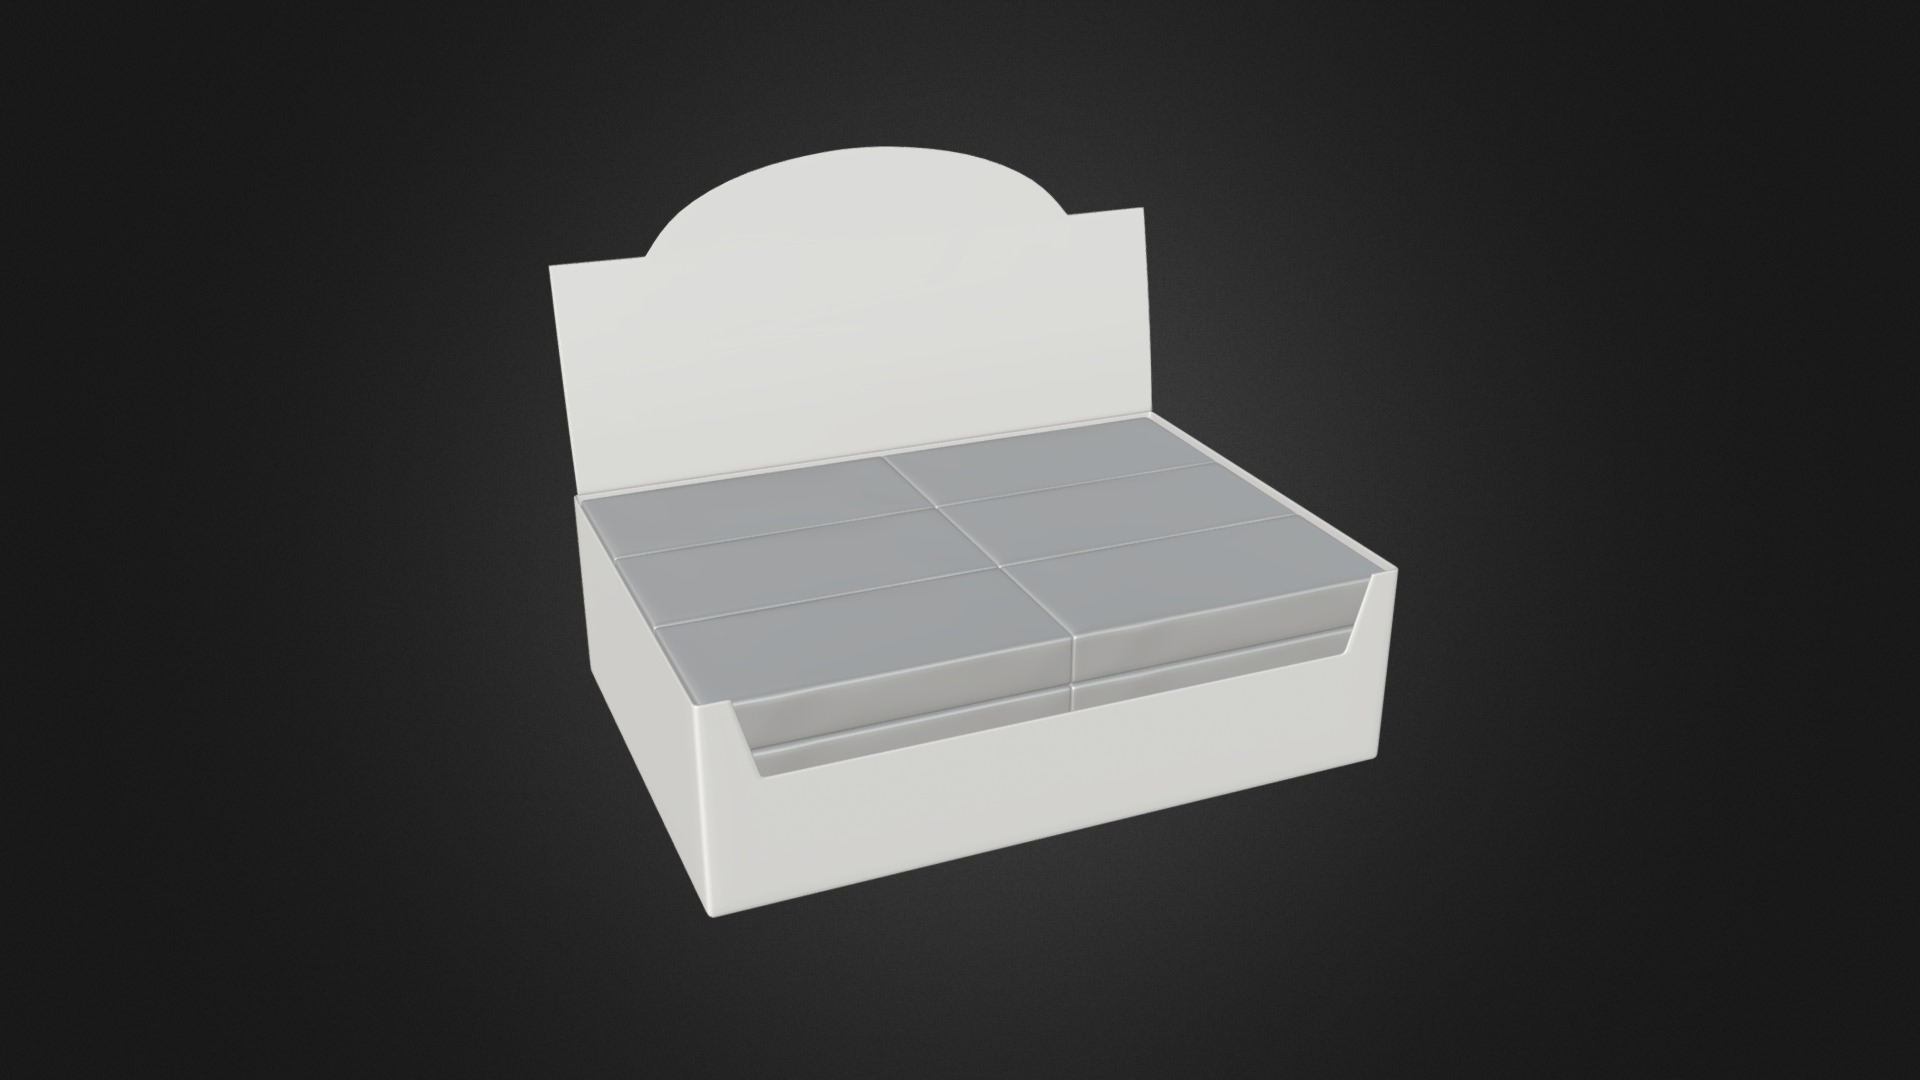 3D model box with chocolate bars - This is a 3D model of the box with chocolate bars. The 3D model is about a white square with a black background.